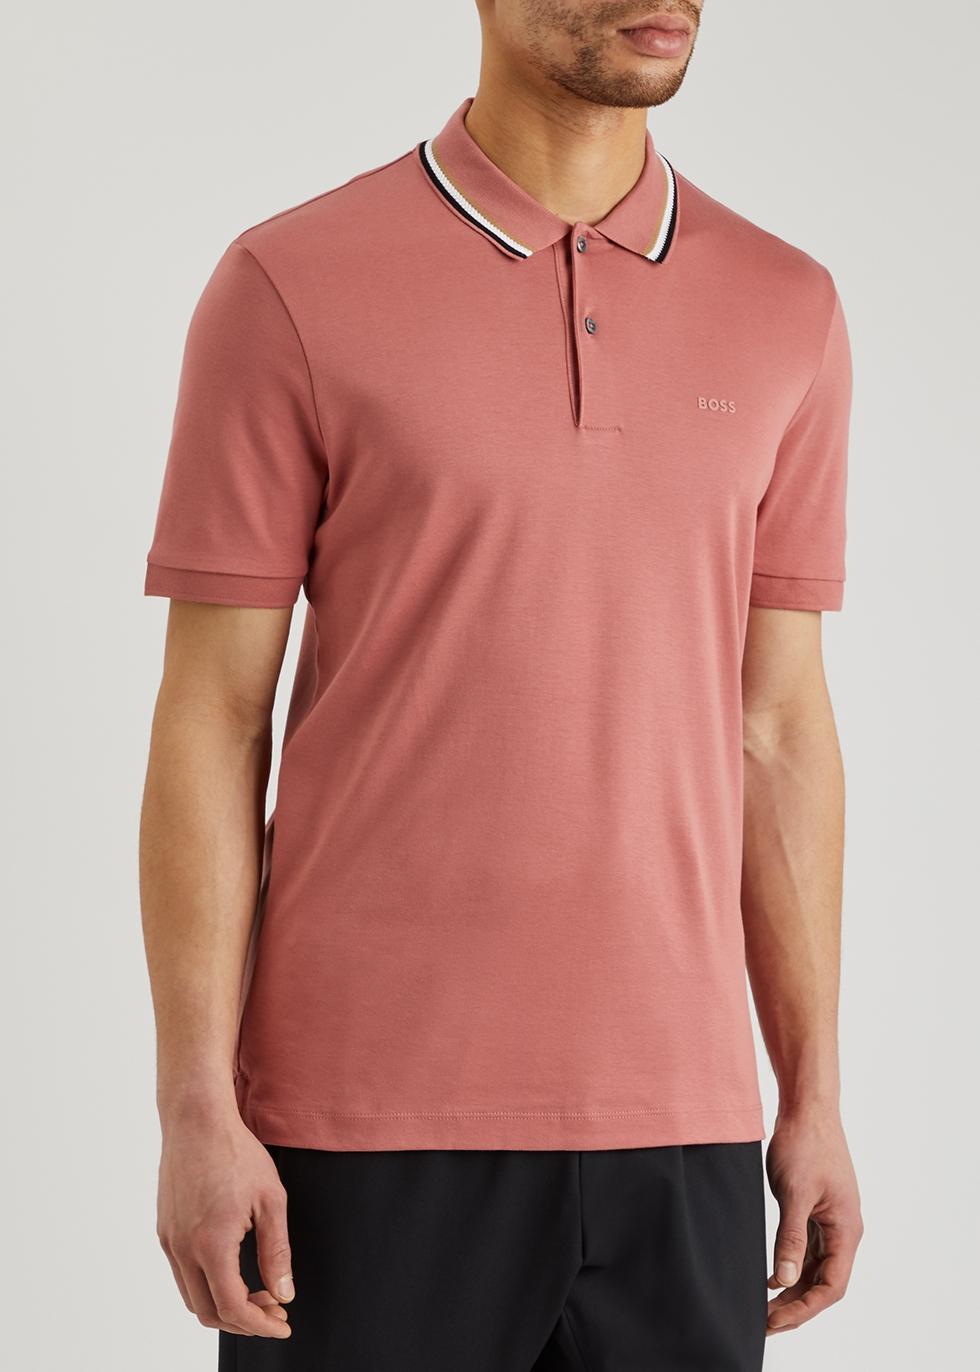 BOSS by HUGO BOSS Cotton-jersey Polo Shirt in Pink for Men | Lyst